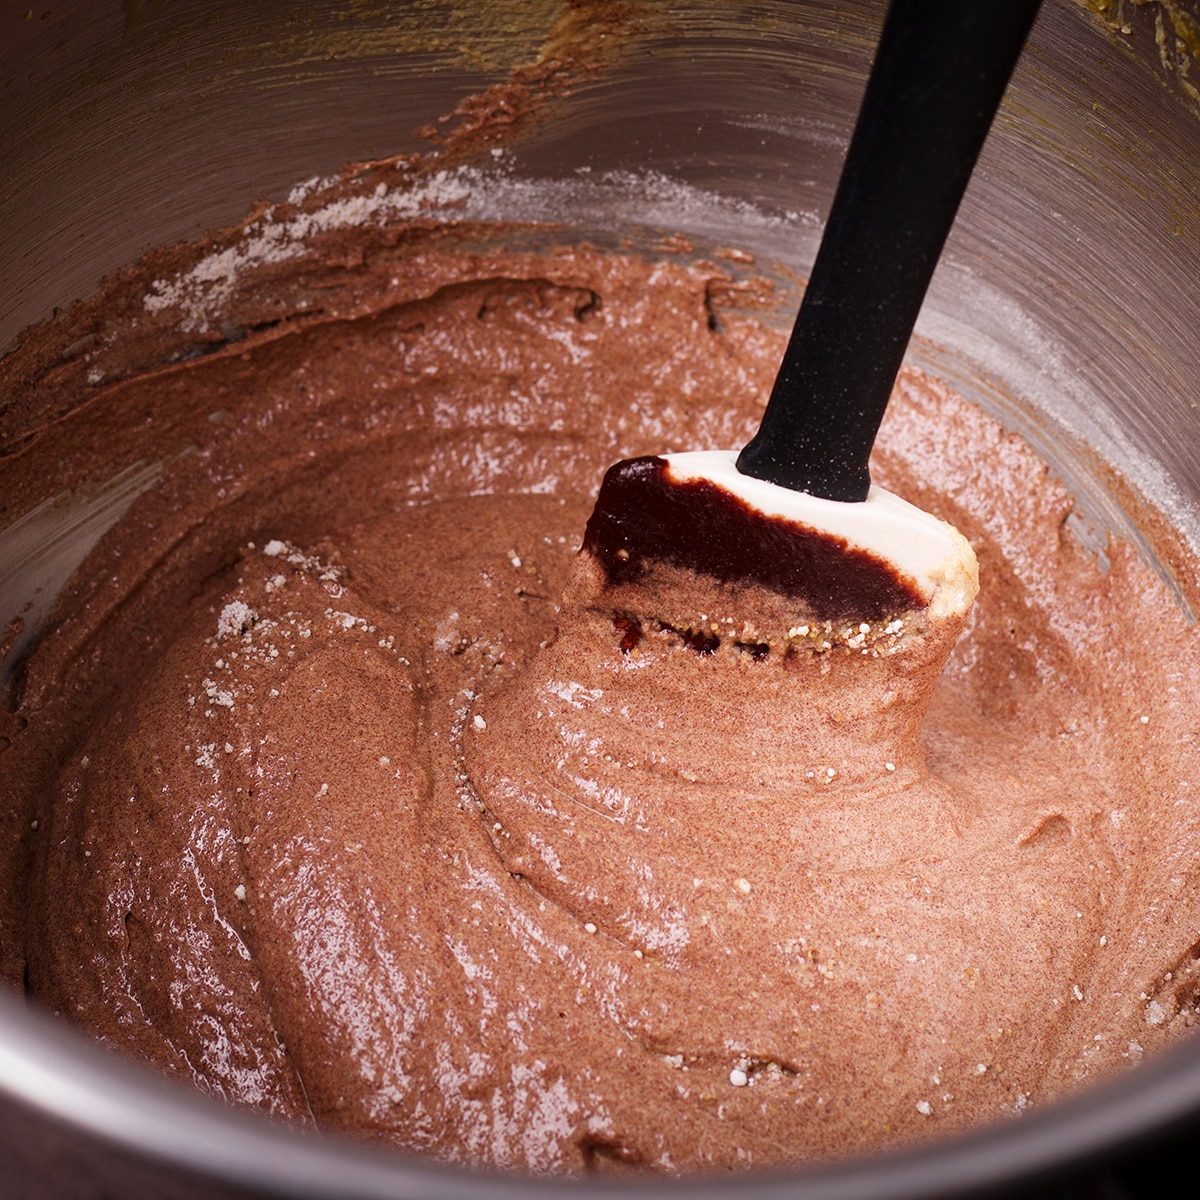 Someone using a spatula to stir melted chocolate into chocolate almond cake batter.